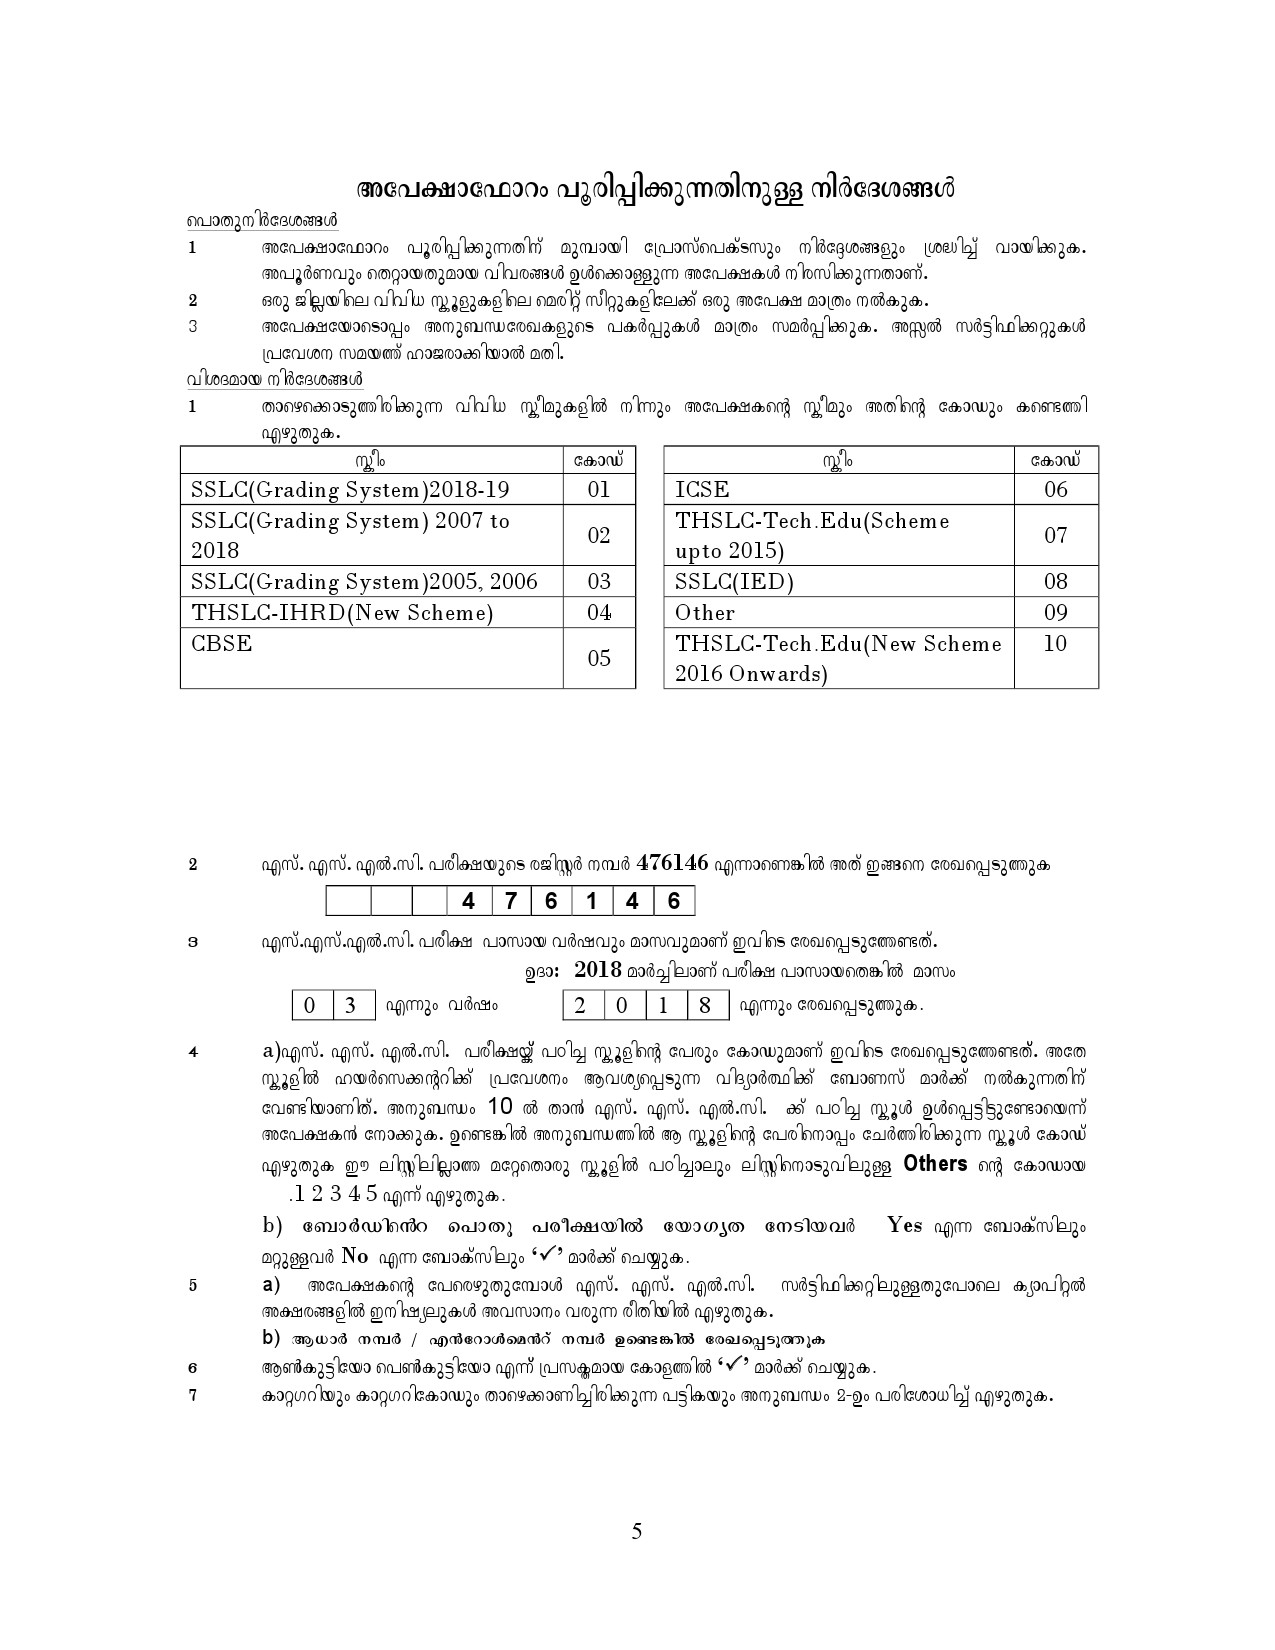 Higher Secondary School Online Application Manual in Malayalam - Notification Image 5